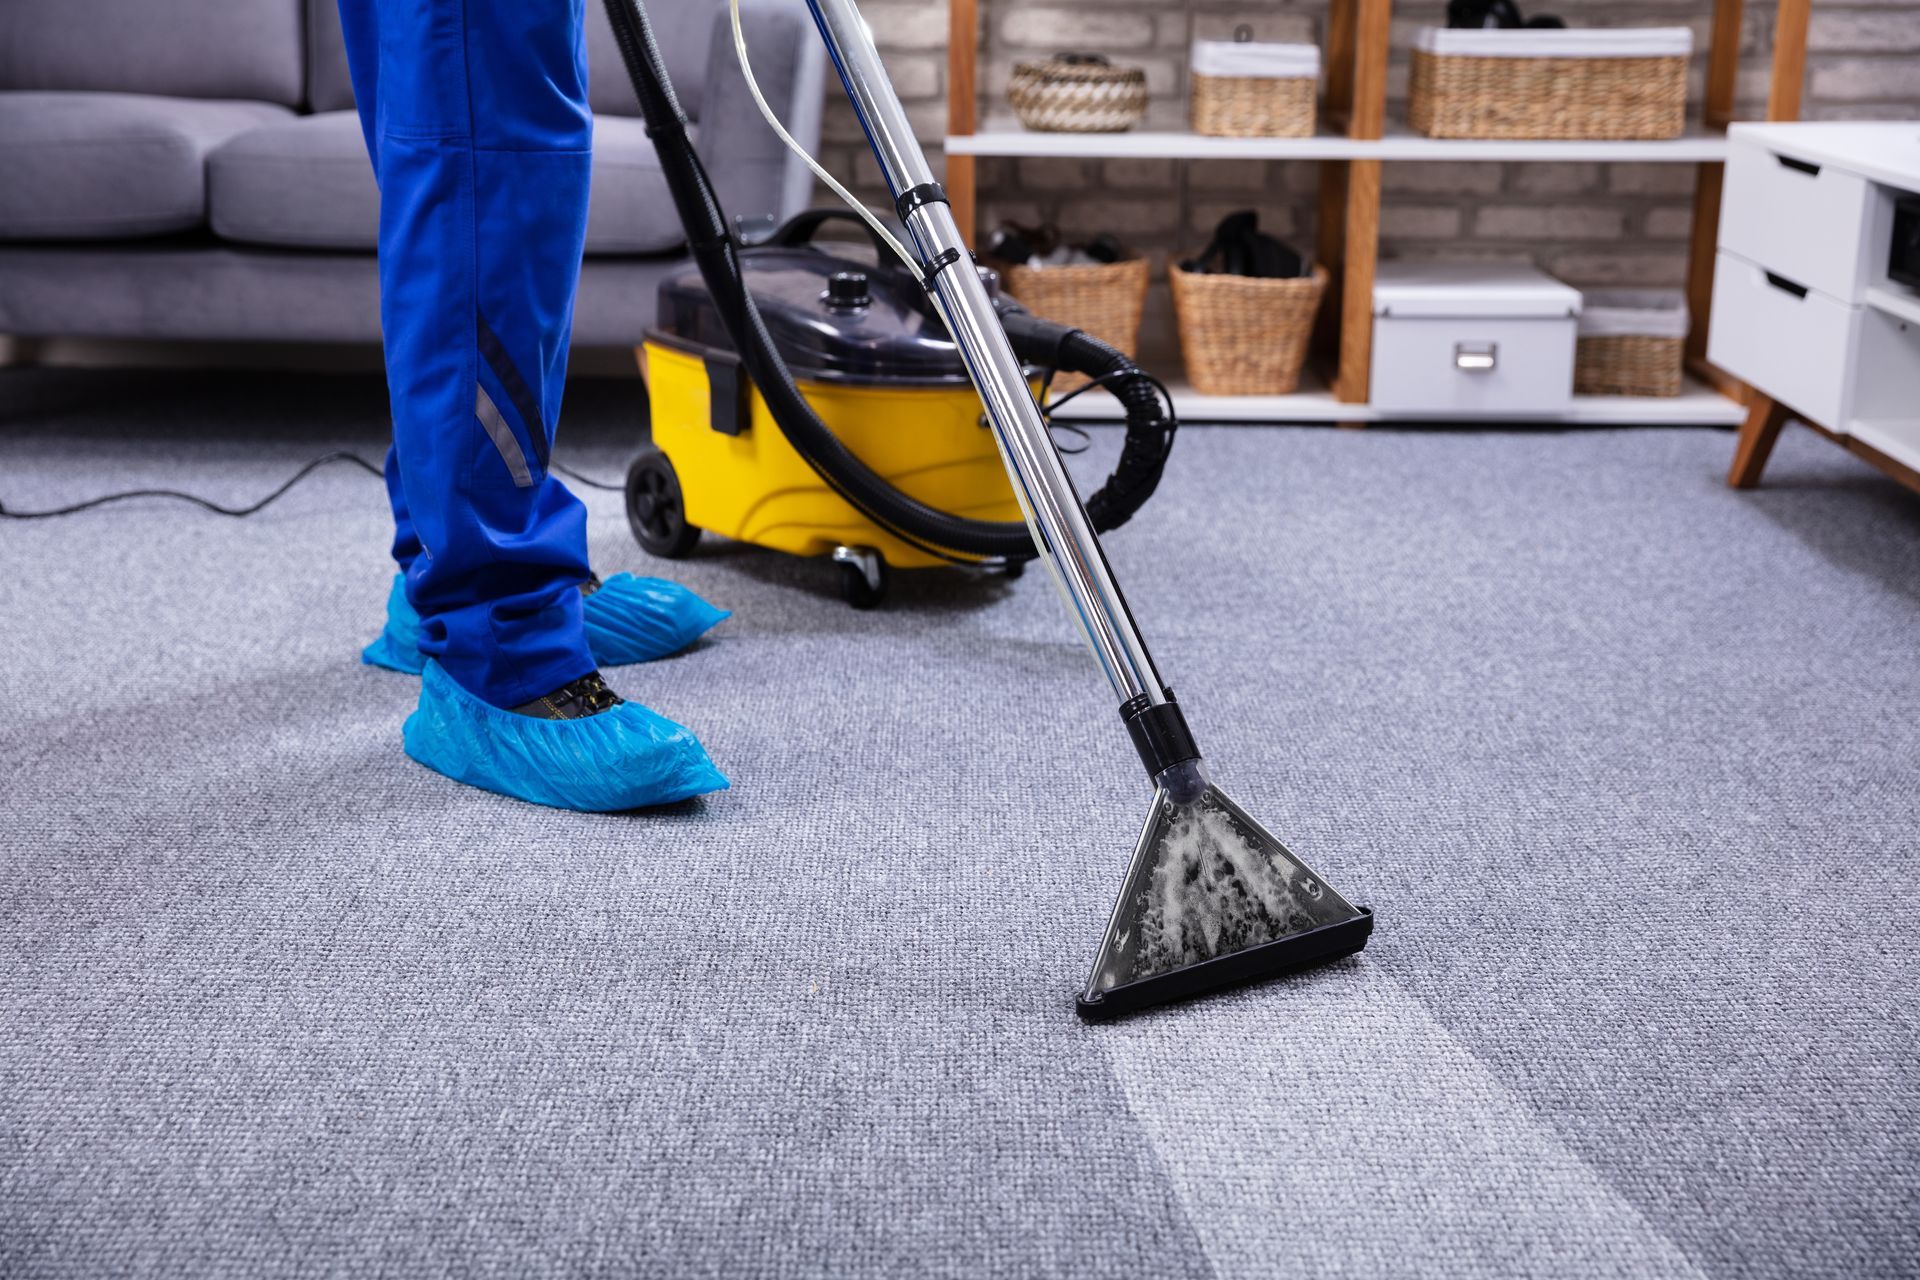 Vacuuming a a carpet in a living room